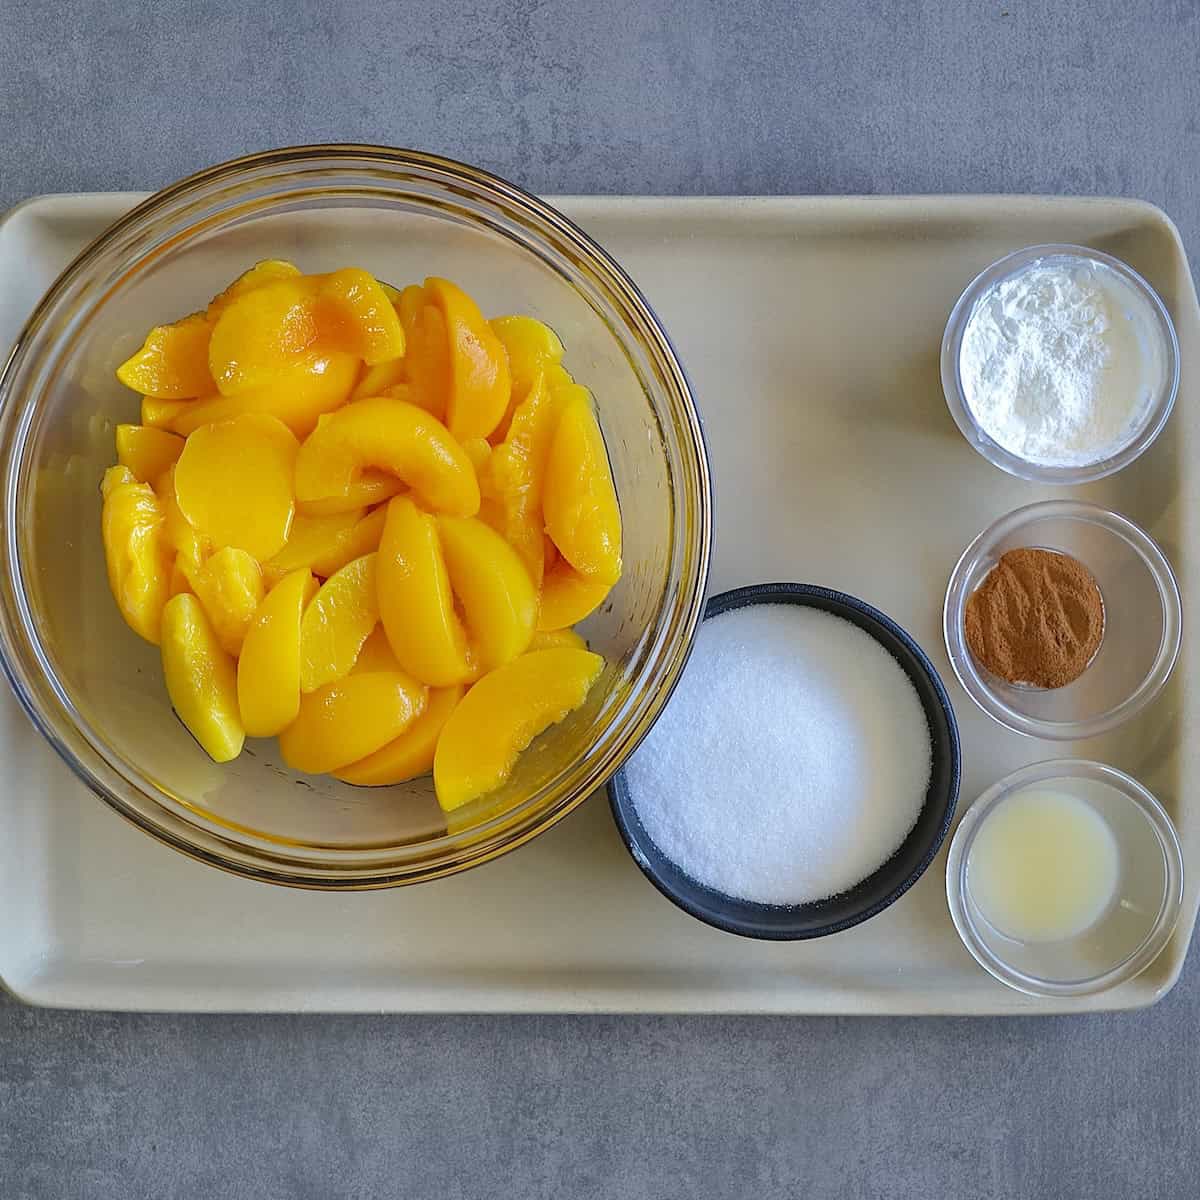 Ingredients needed for peach pie